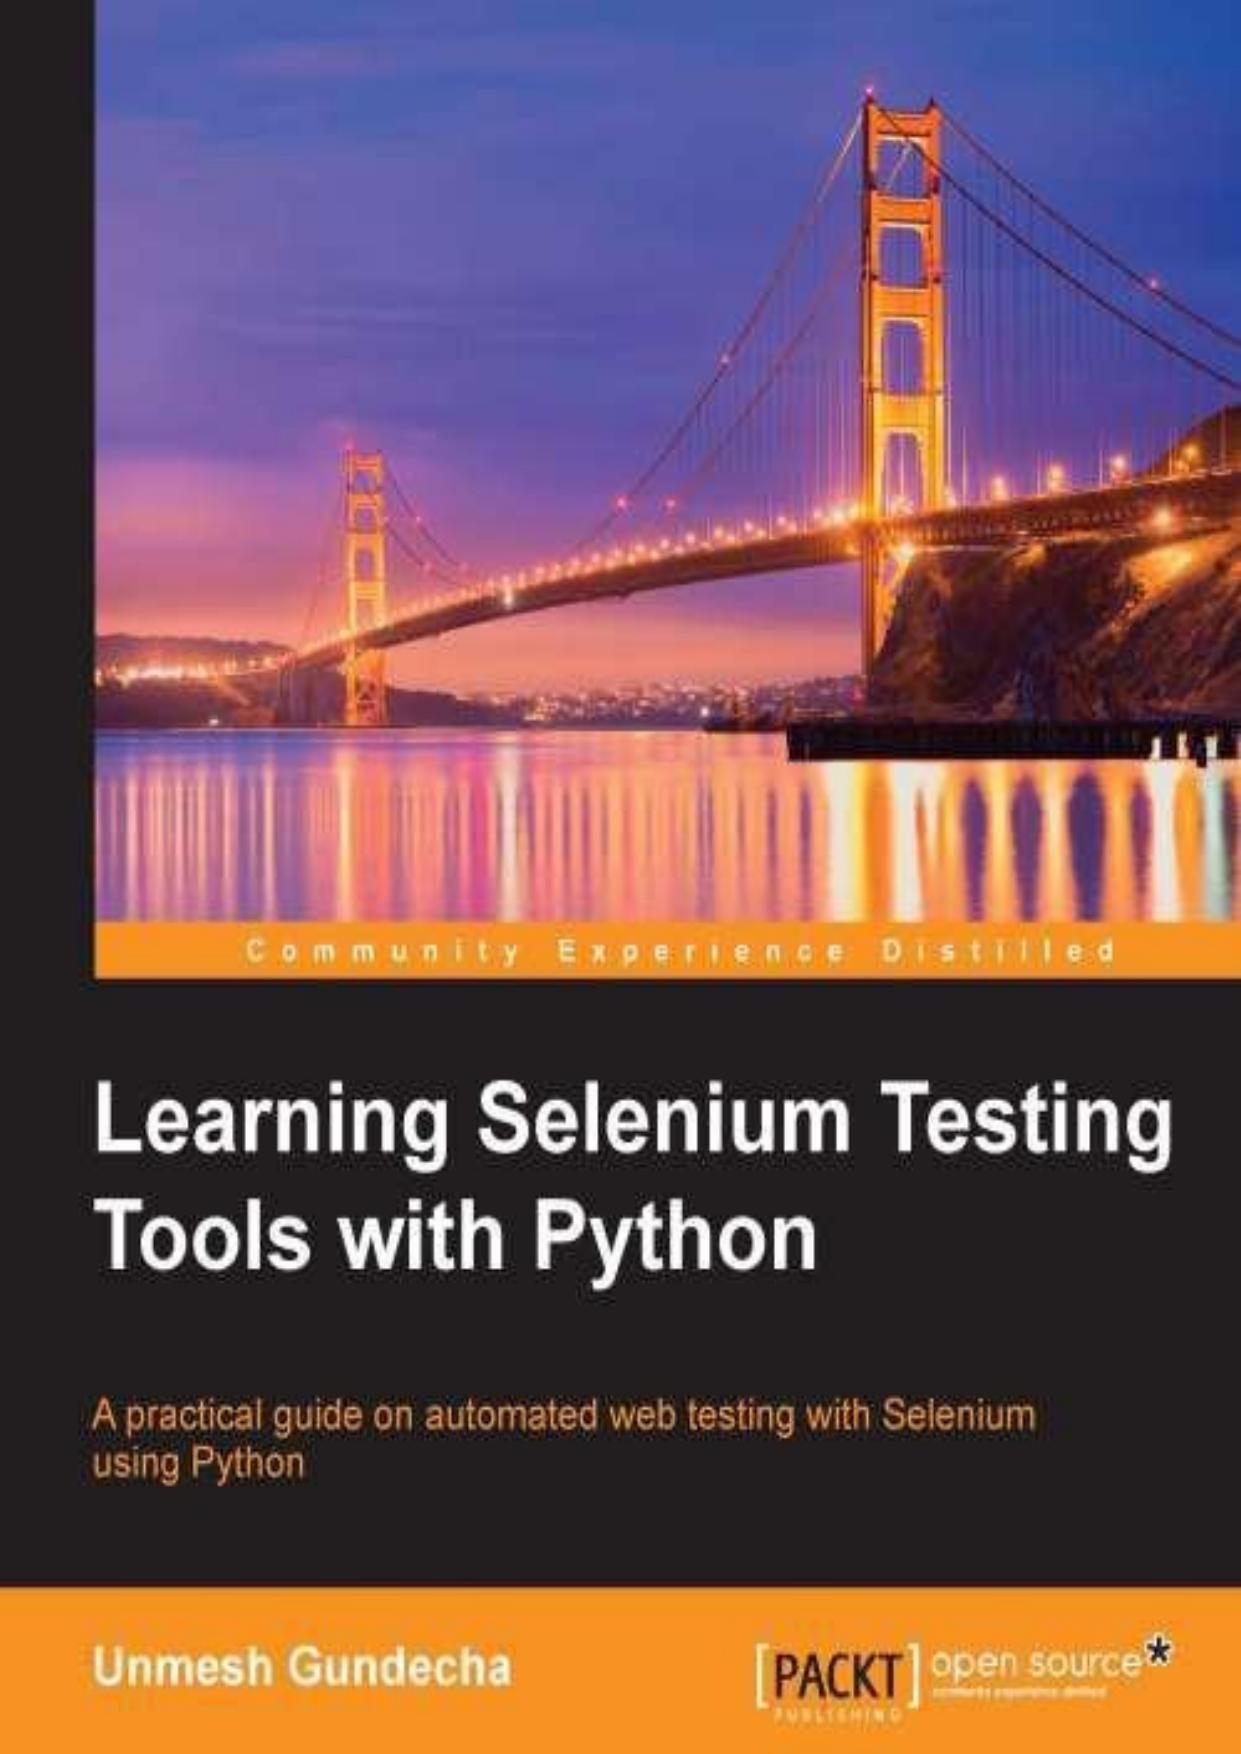 Learning Selenium Testing Tools with Python by Unmesh Gundecha